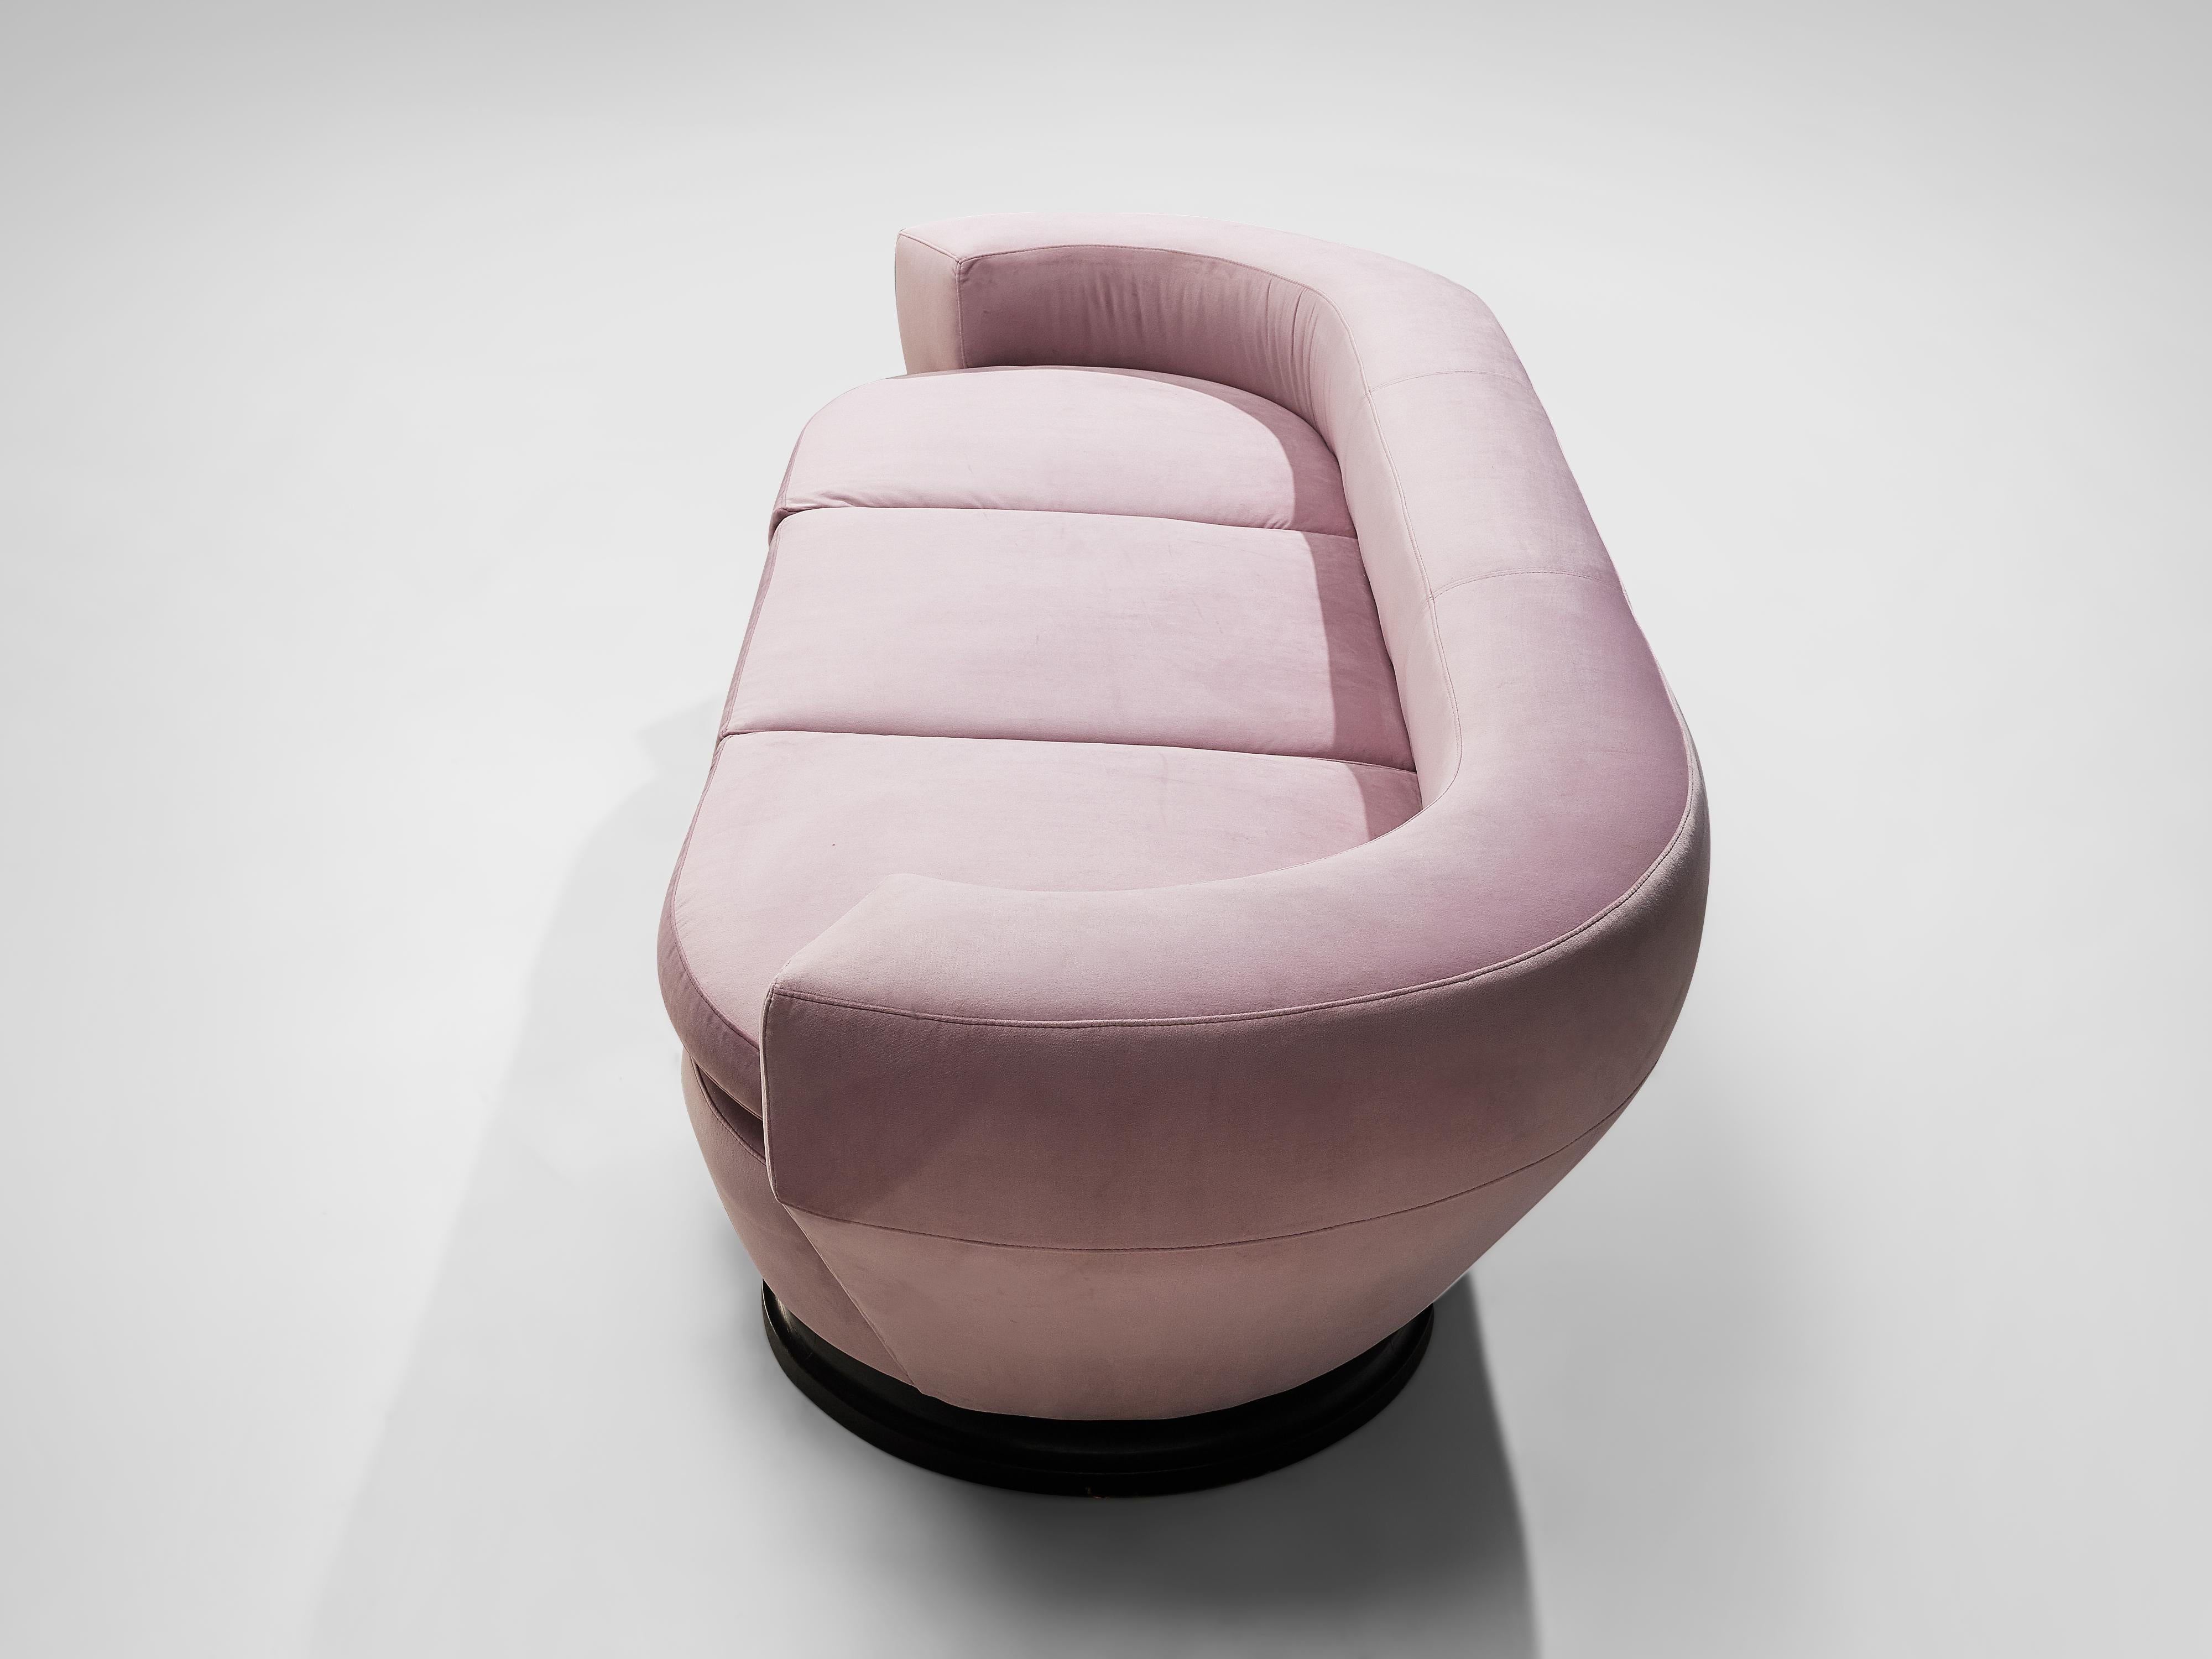 Mid-20th Century Italian Sofa in Soft Pink Upholstery 